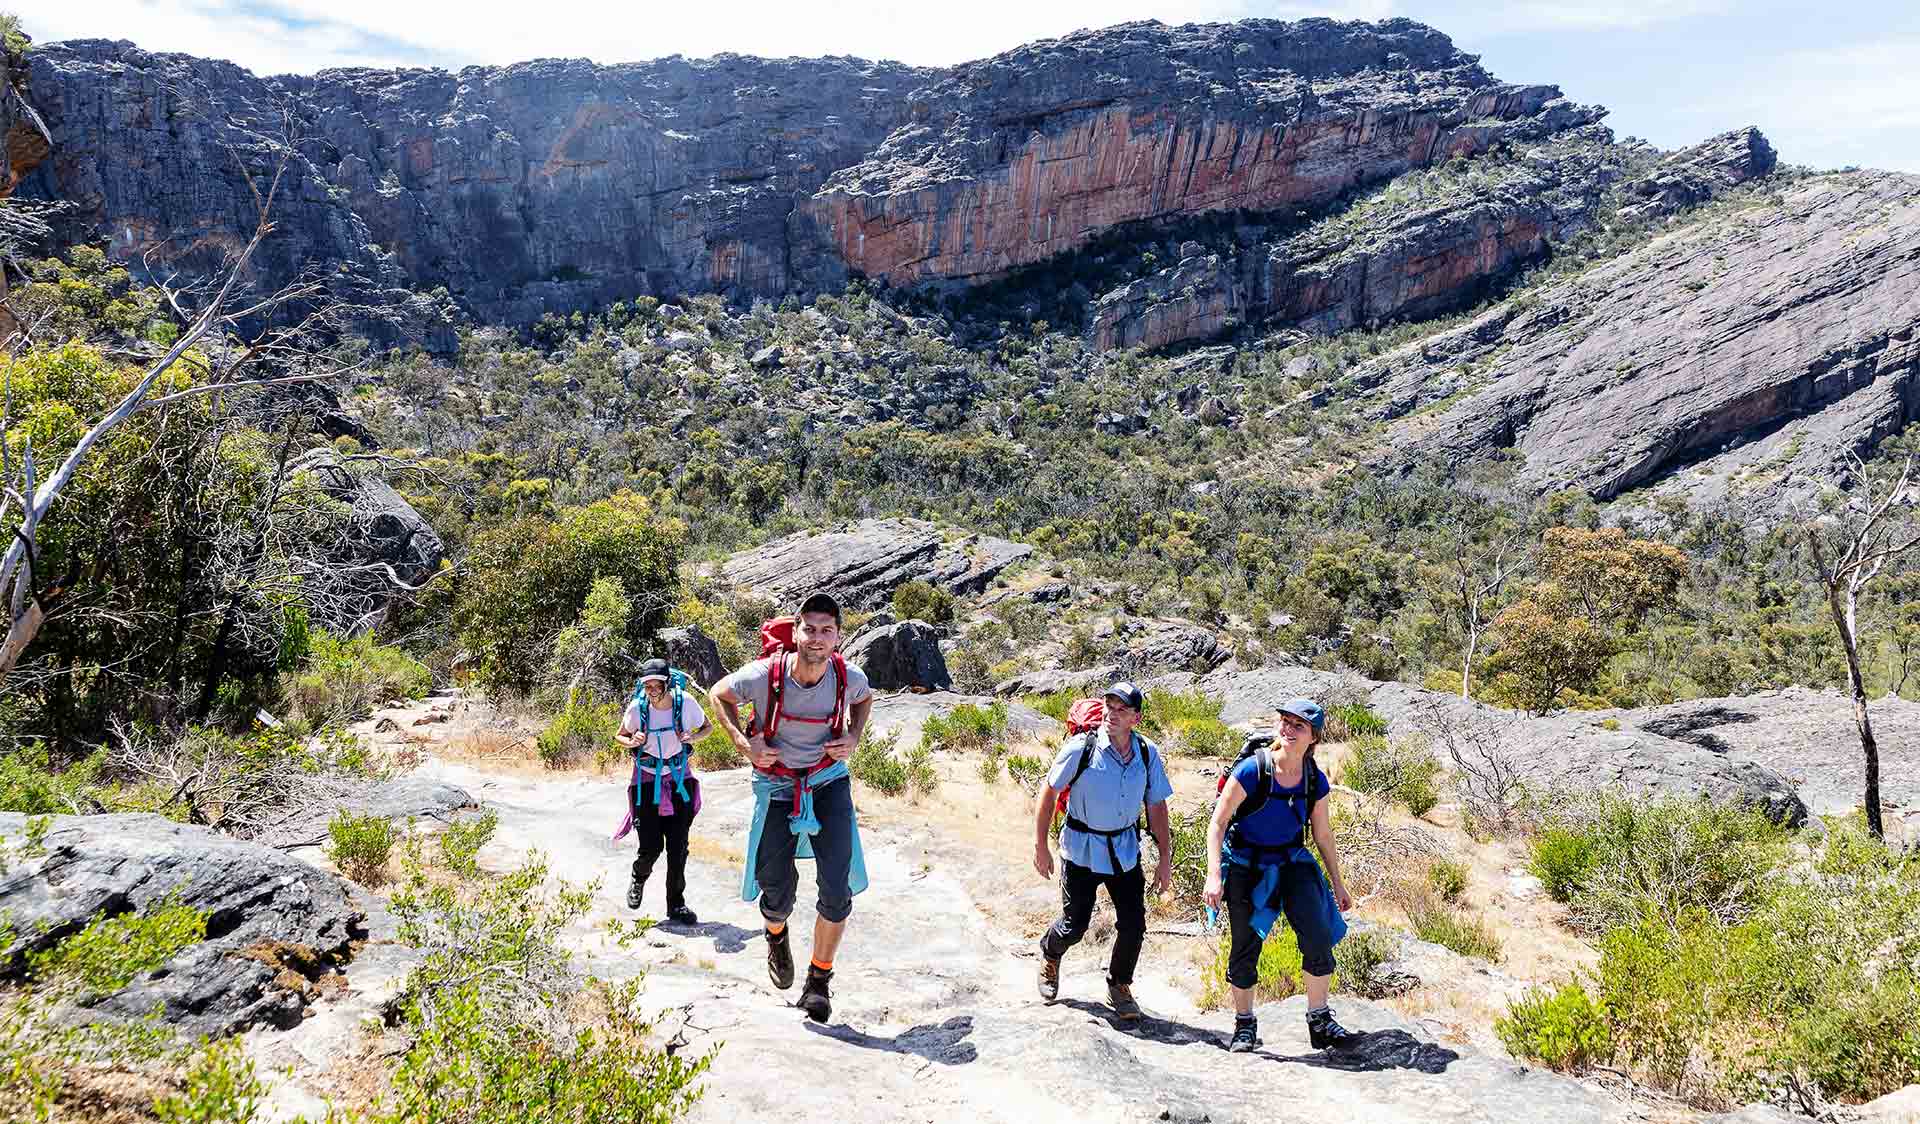 Four friends looking up at the surrounding scenery during their hike at Mount Stapylton